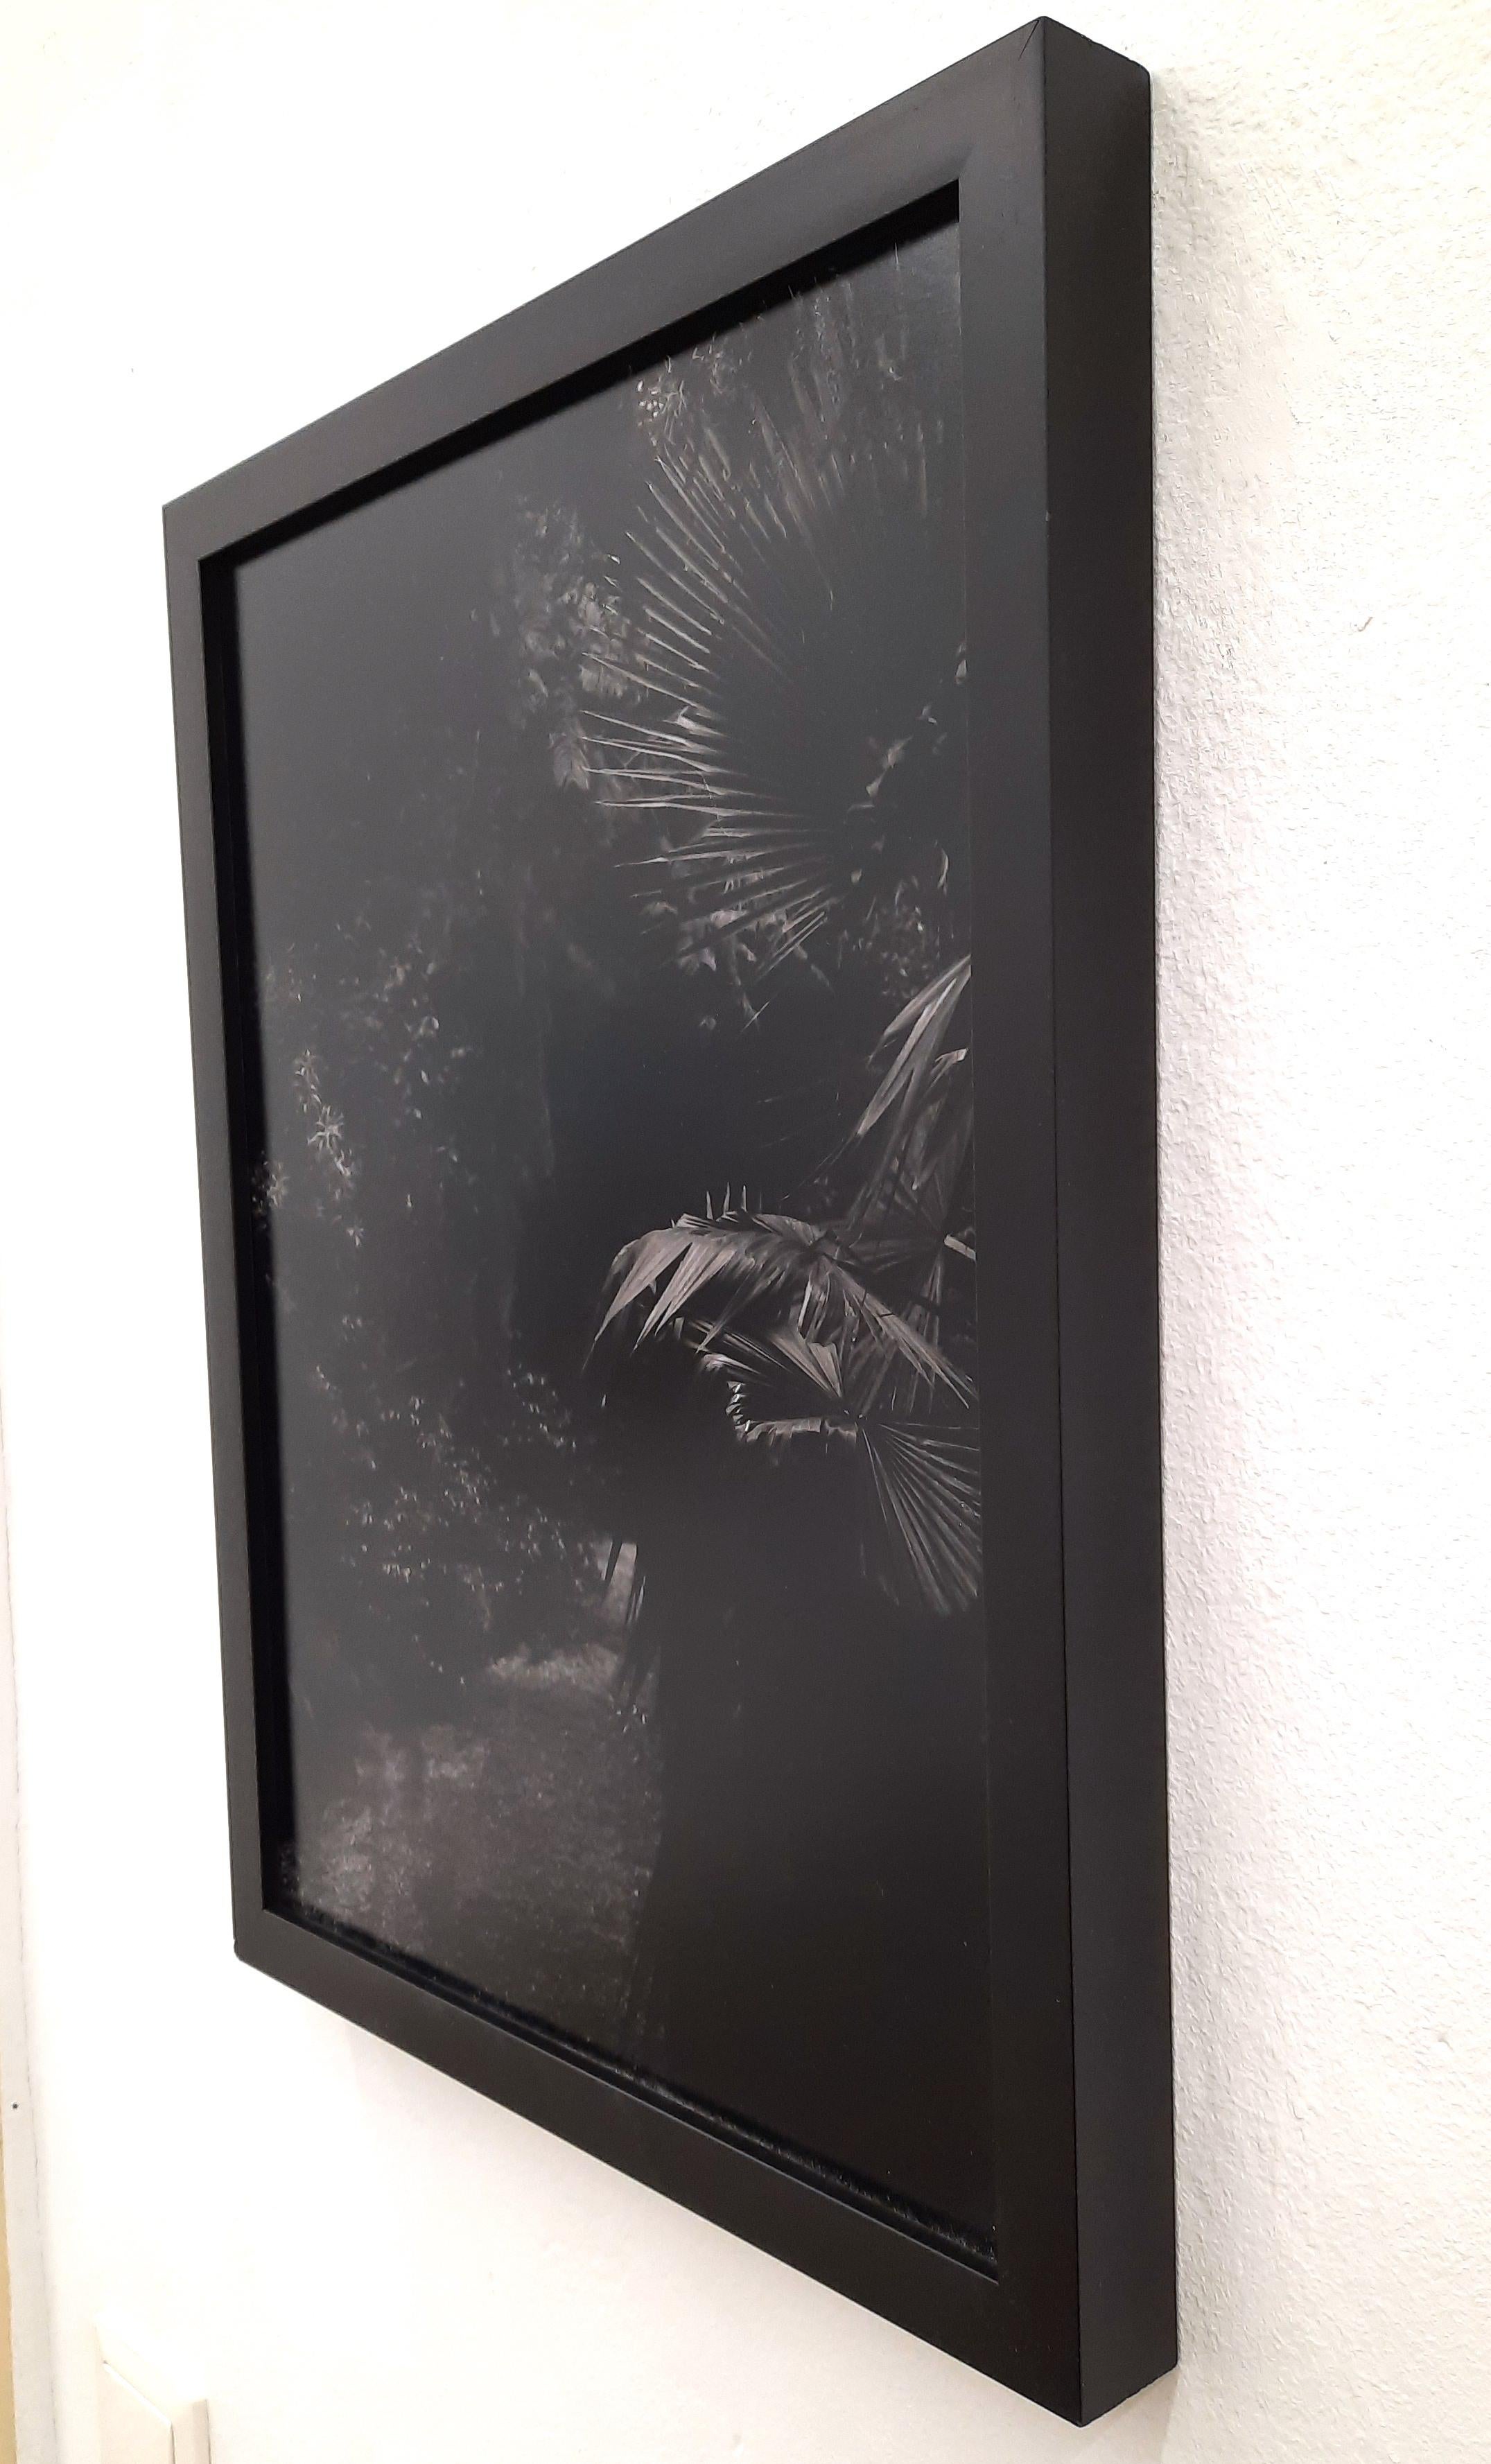 Tina Ribarits
the haunting - Contemporary Dark Landscape Photography
Edition 2/3 + 2 AP
Print is signed and numbered.

Tina Ribarits works with a conceptual approach in a variety of media including installation, video and photography to create